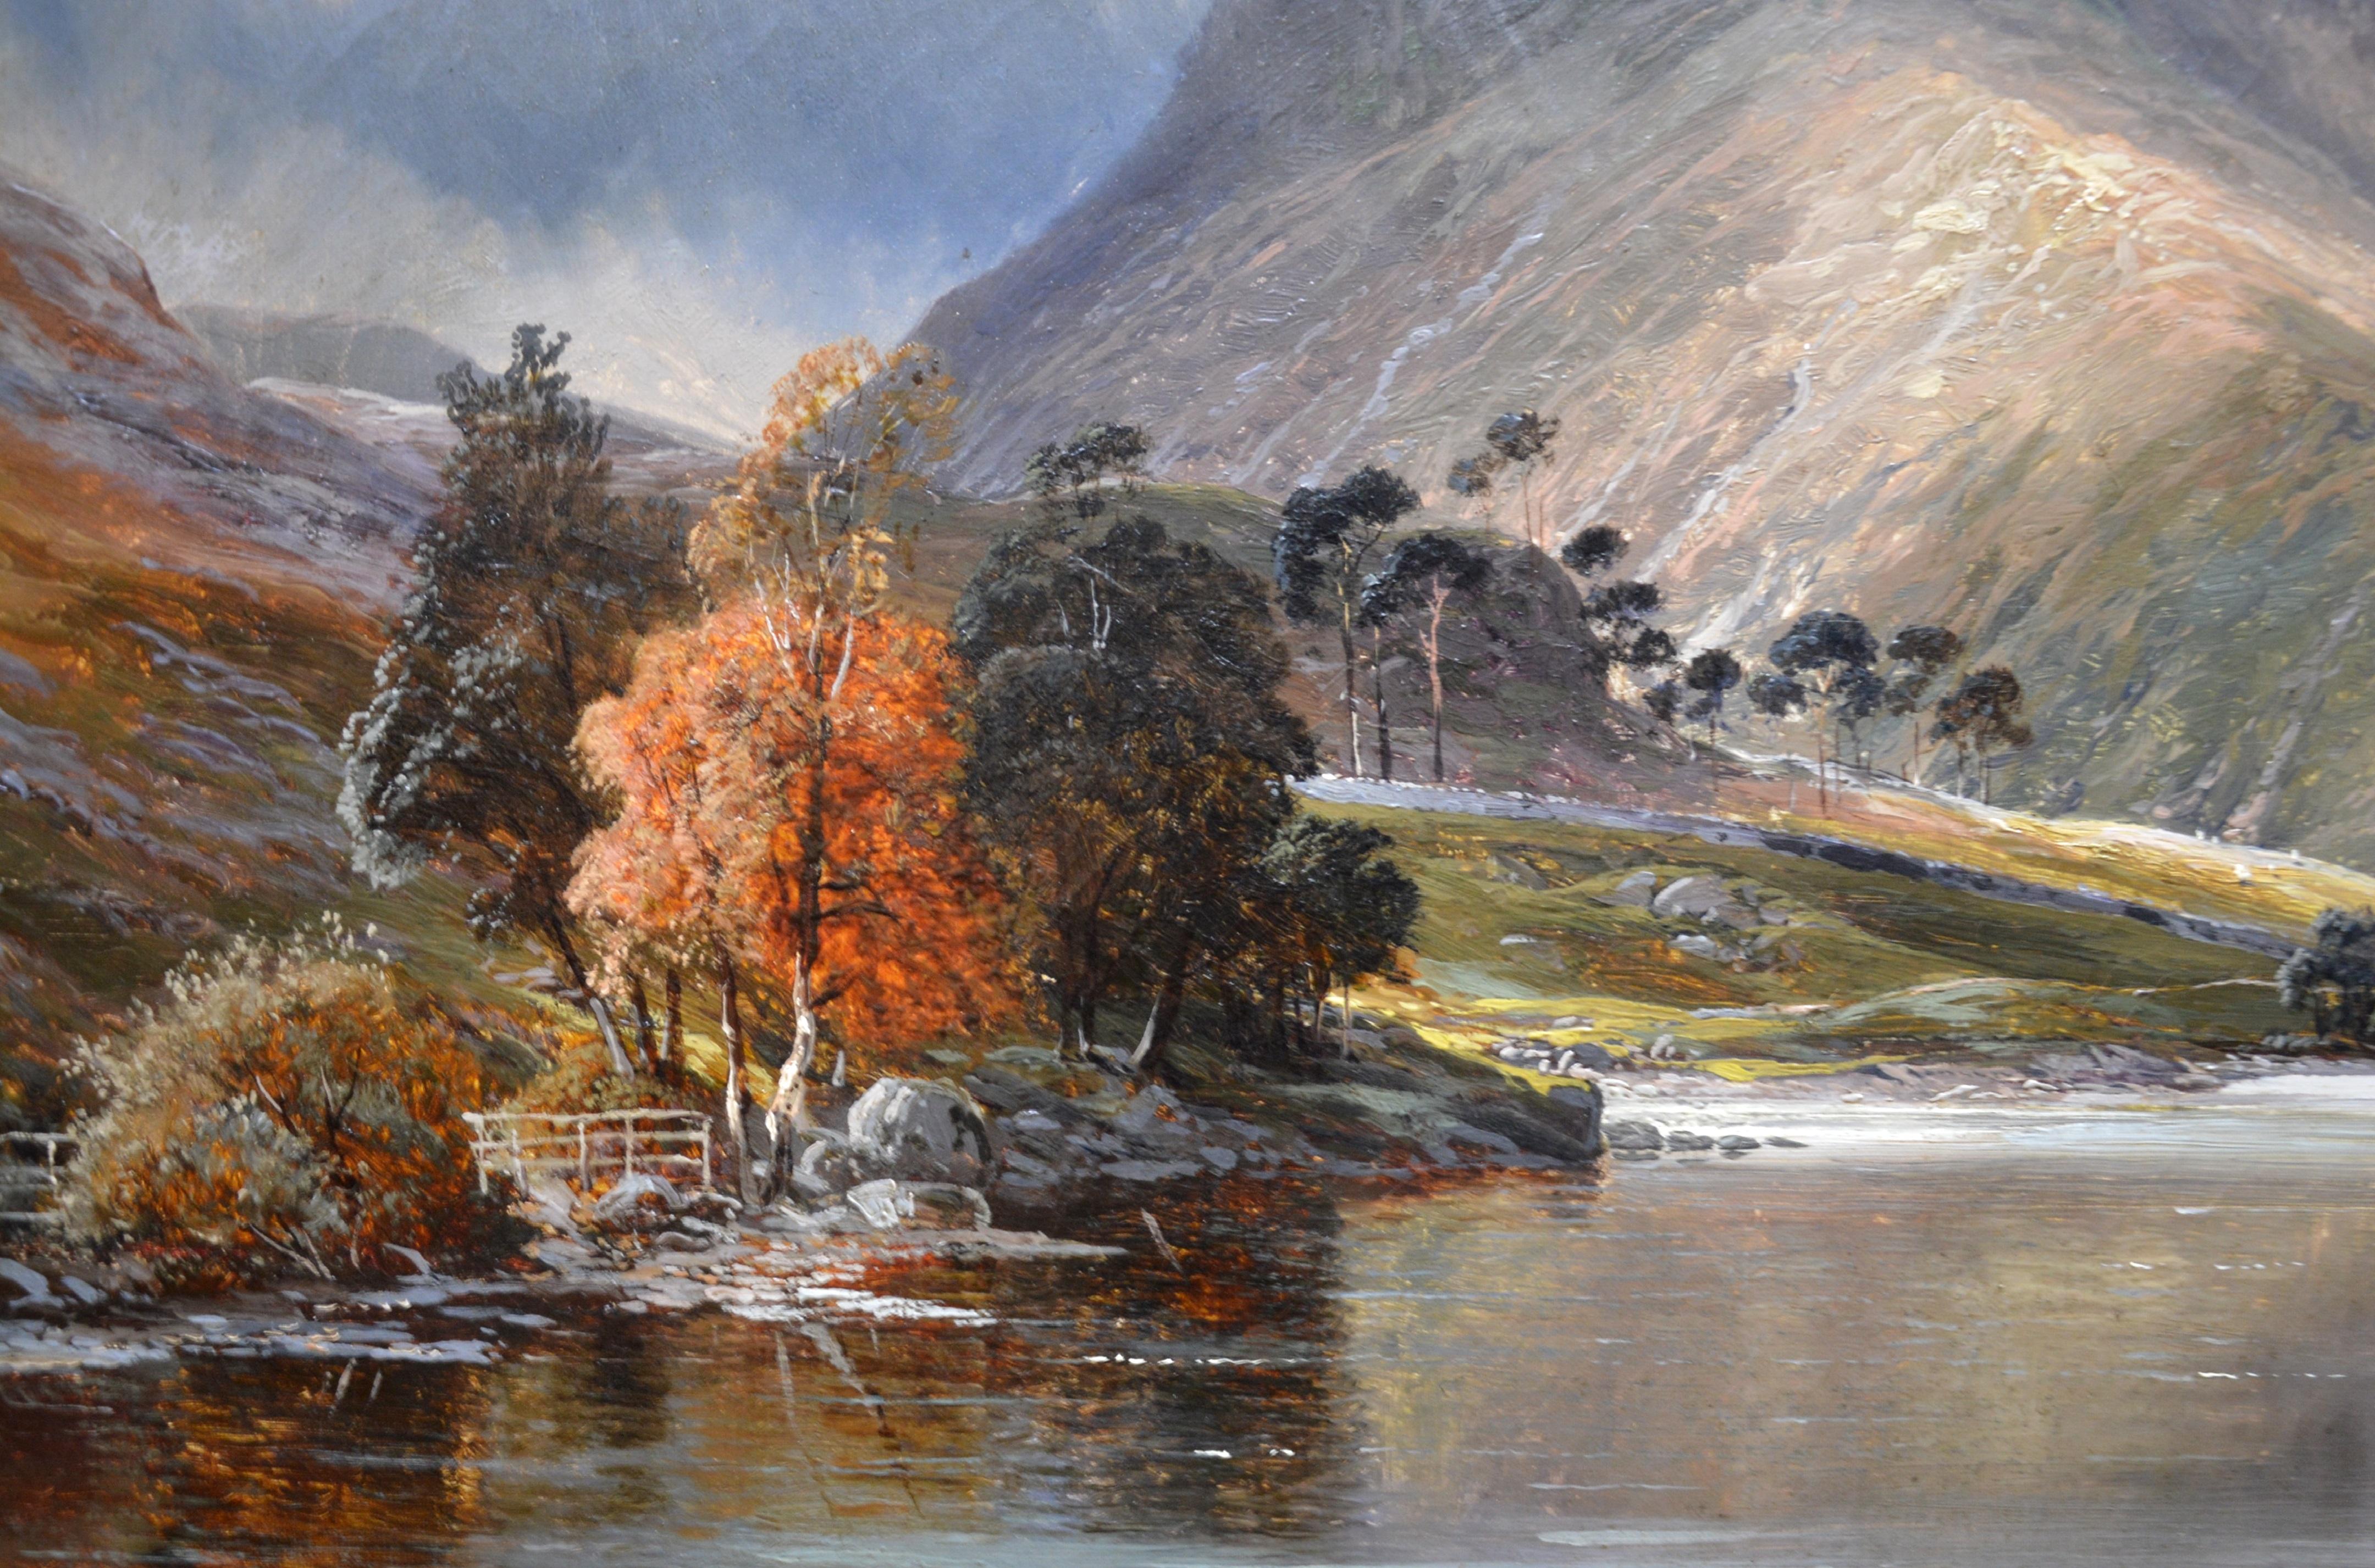 Scafell Pike from Wastwater - 19th Century English Landscape Oil Painting 1